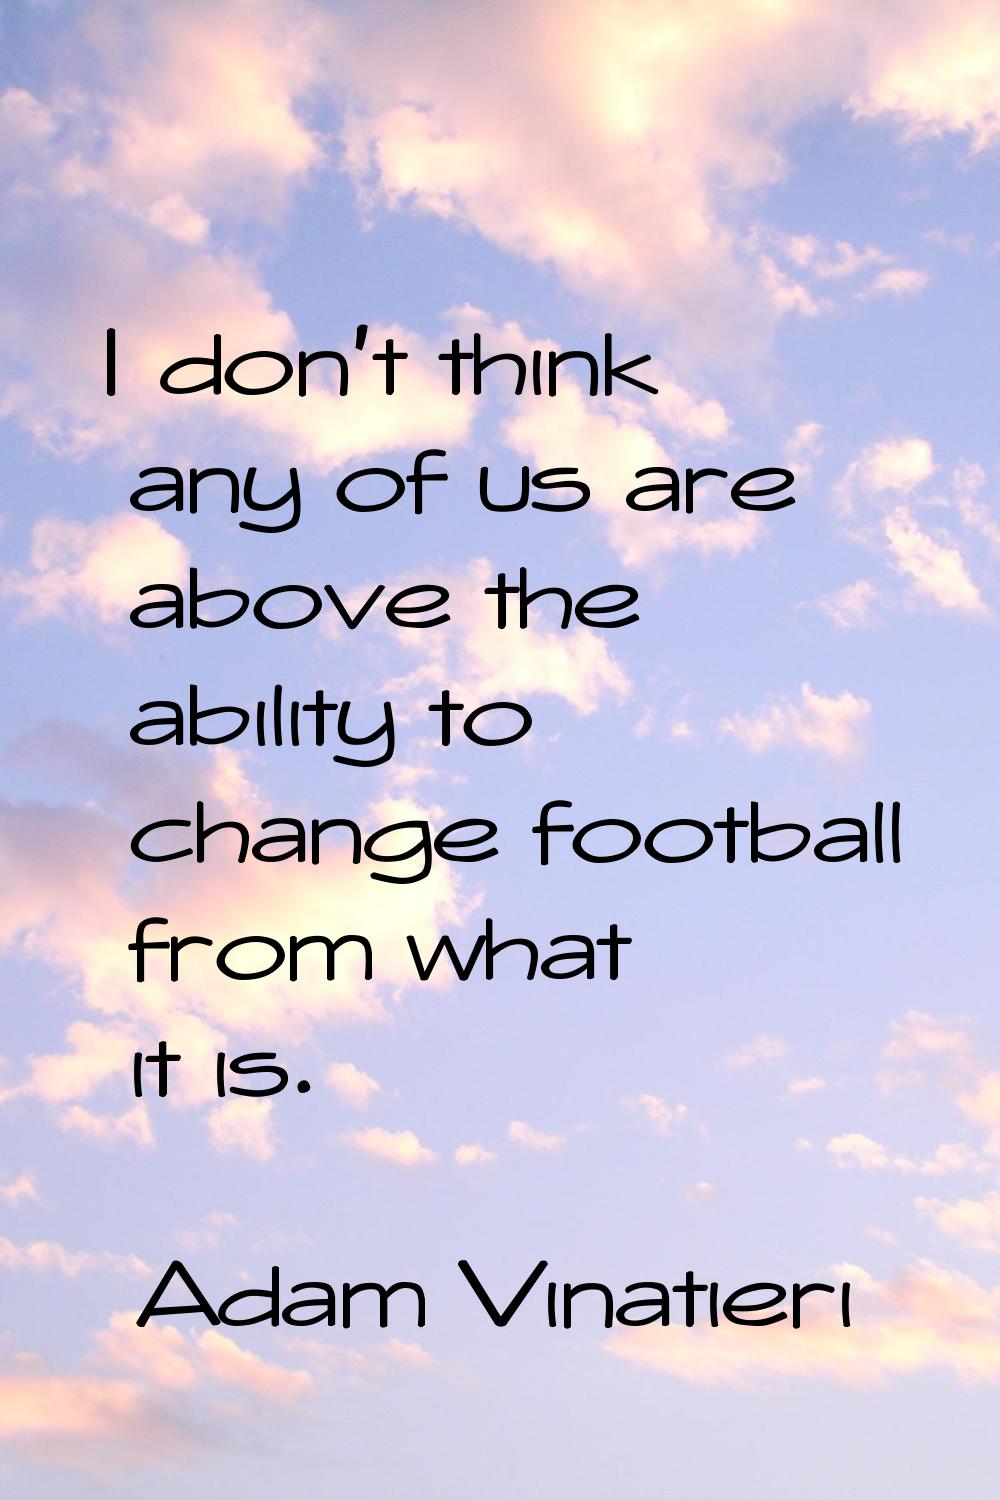 I don't think any of us are above the ability to change football from what it is.